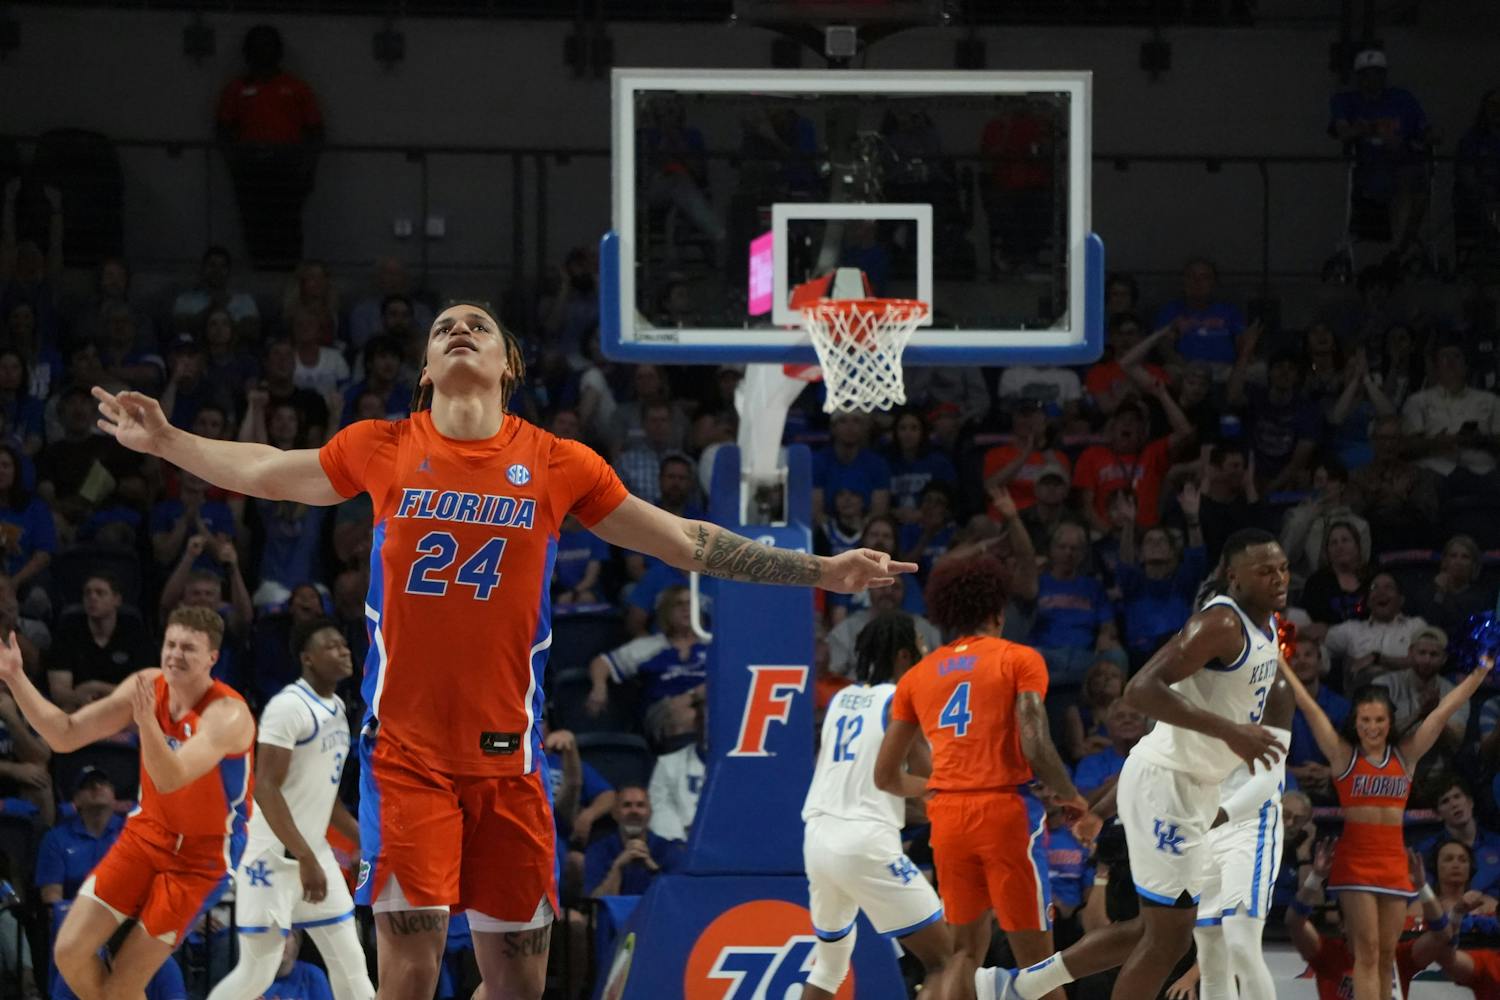 Florida guard Riley Kugel celebrates a 3-pointer in the Gators' 82-74 loss to the Kentucky Wildcats Wednesday, Feb. 22, 2023.